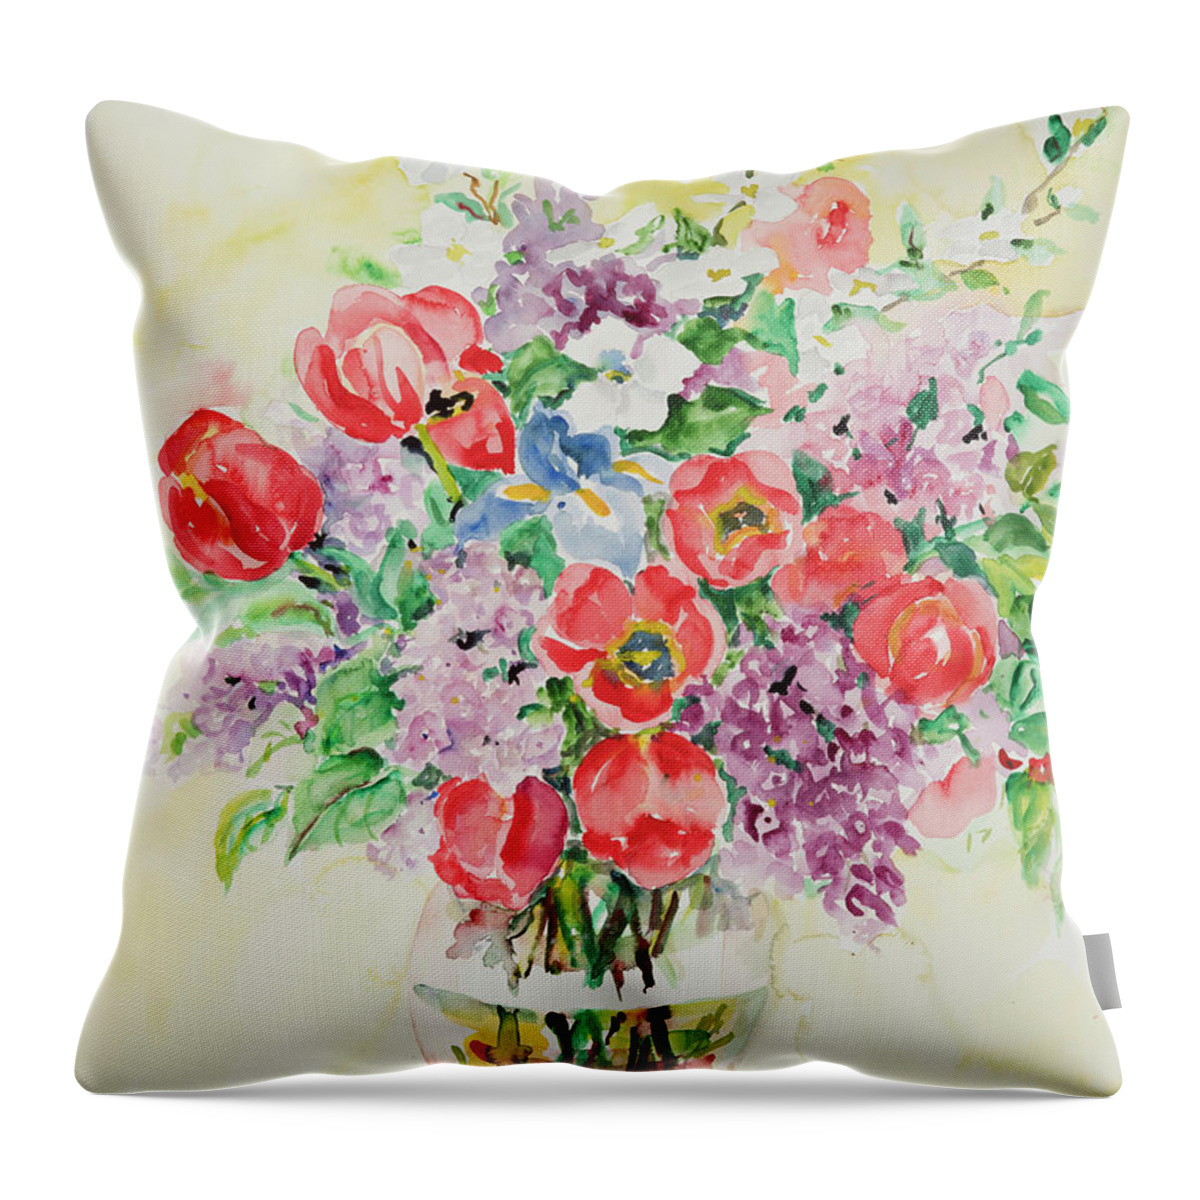 This Is An Original Watercolor On Paper Floral Still Life Painting 30 X 22 Inches. Throw Pillow featuring the painting Watercolor Series 24 by Ingrid Dohm